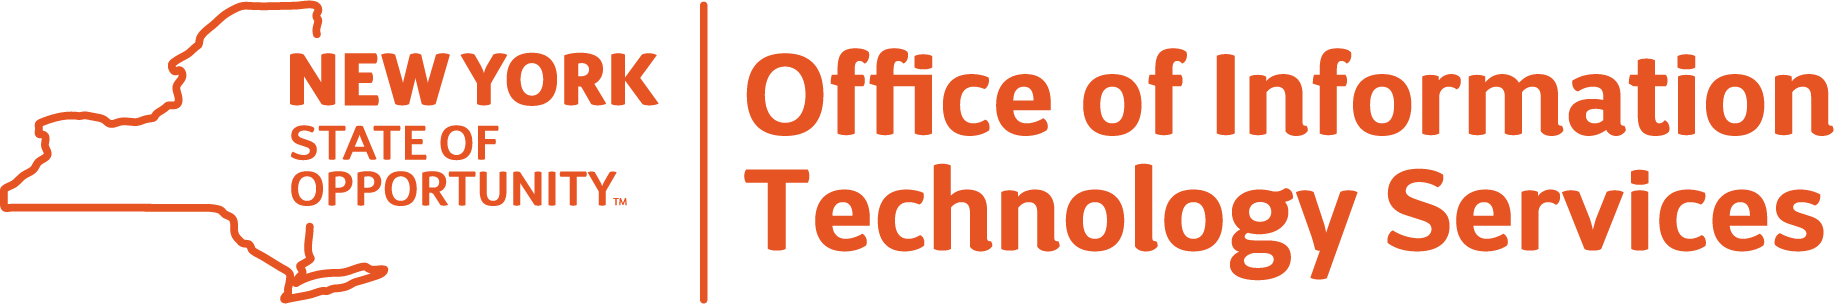 New York, State of Opportunity  | Office of Information Technology Services